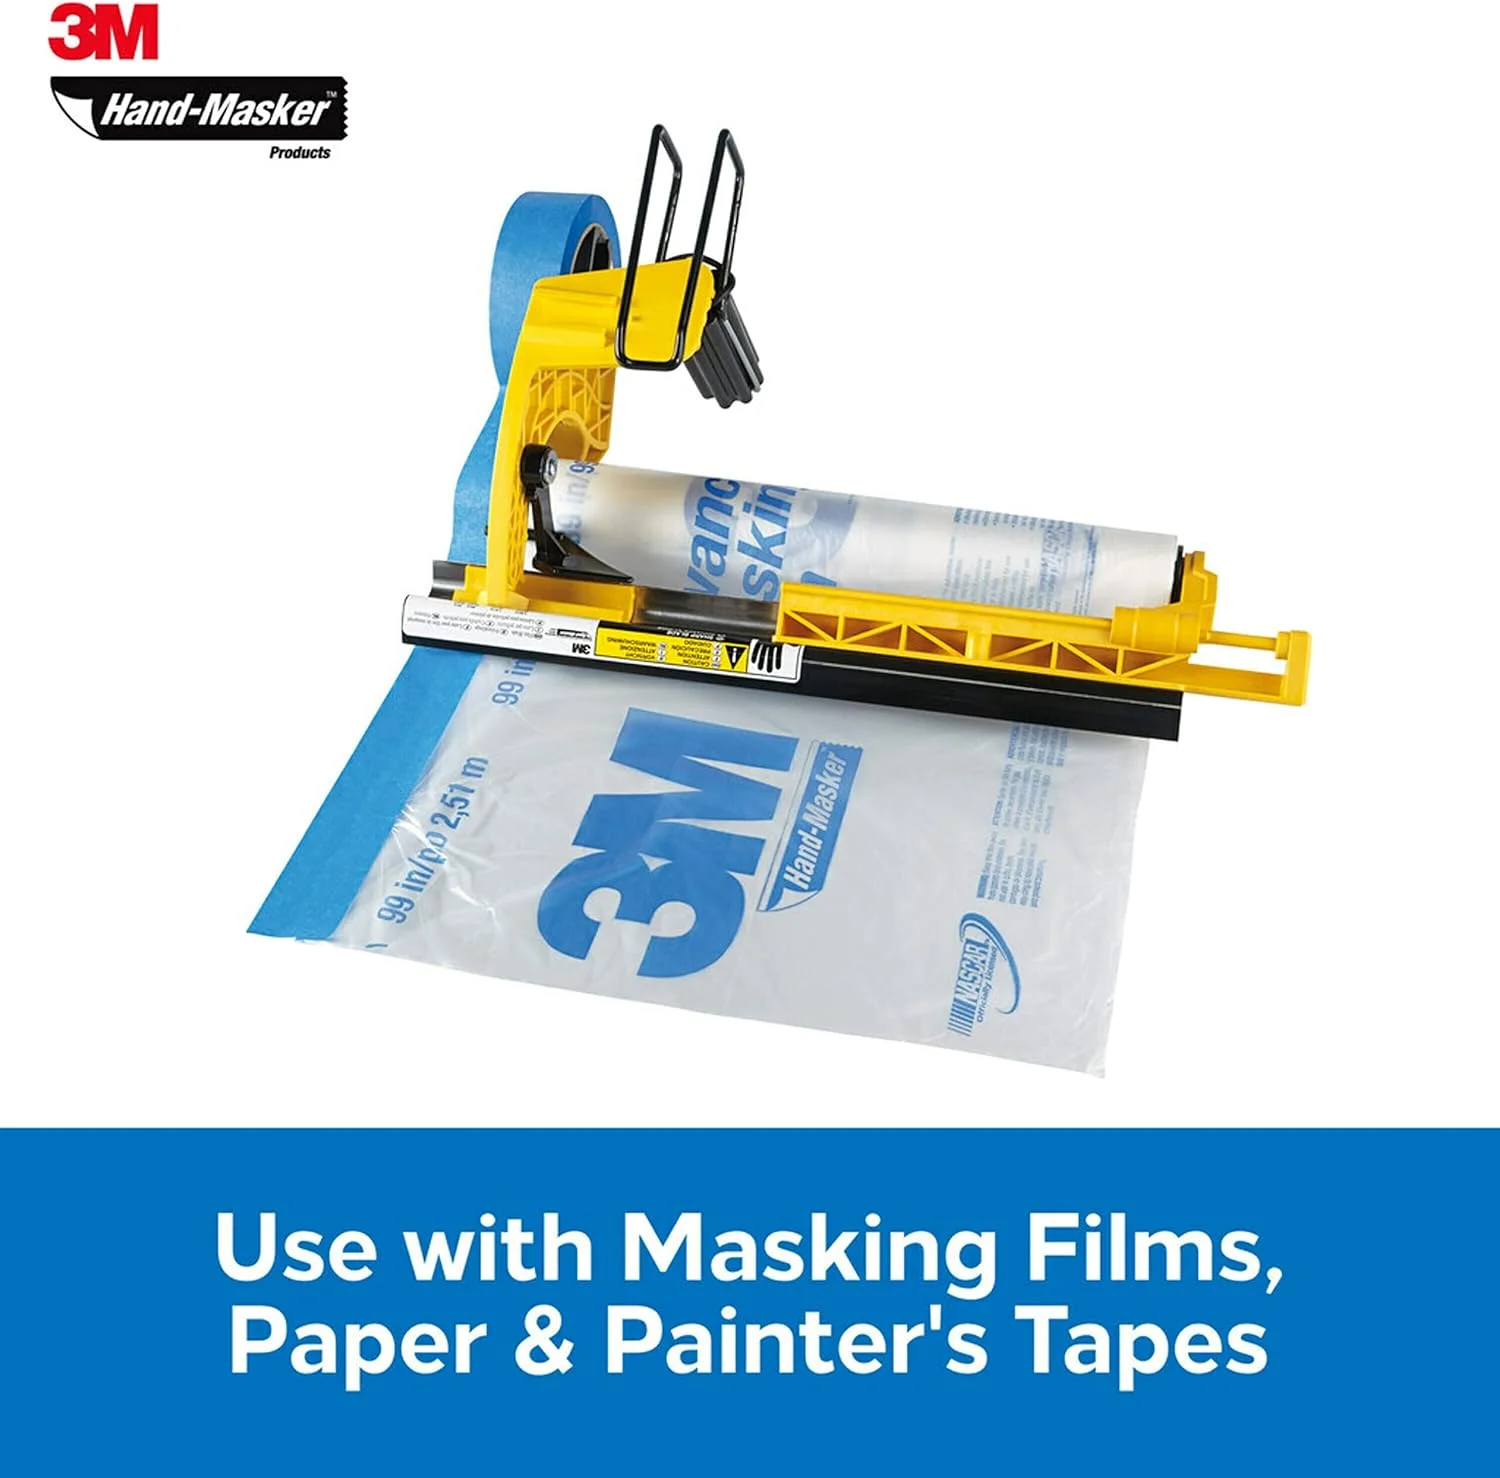 Scotch Hand-Masker M3000 Tool Painters Tape and Masking Film Dispenser Kit, Protects Surfaces from Paint Splatters, Includes Painters Tape and Masking Film, 1 Kit